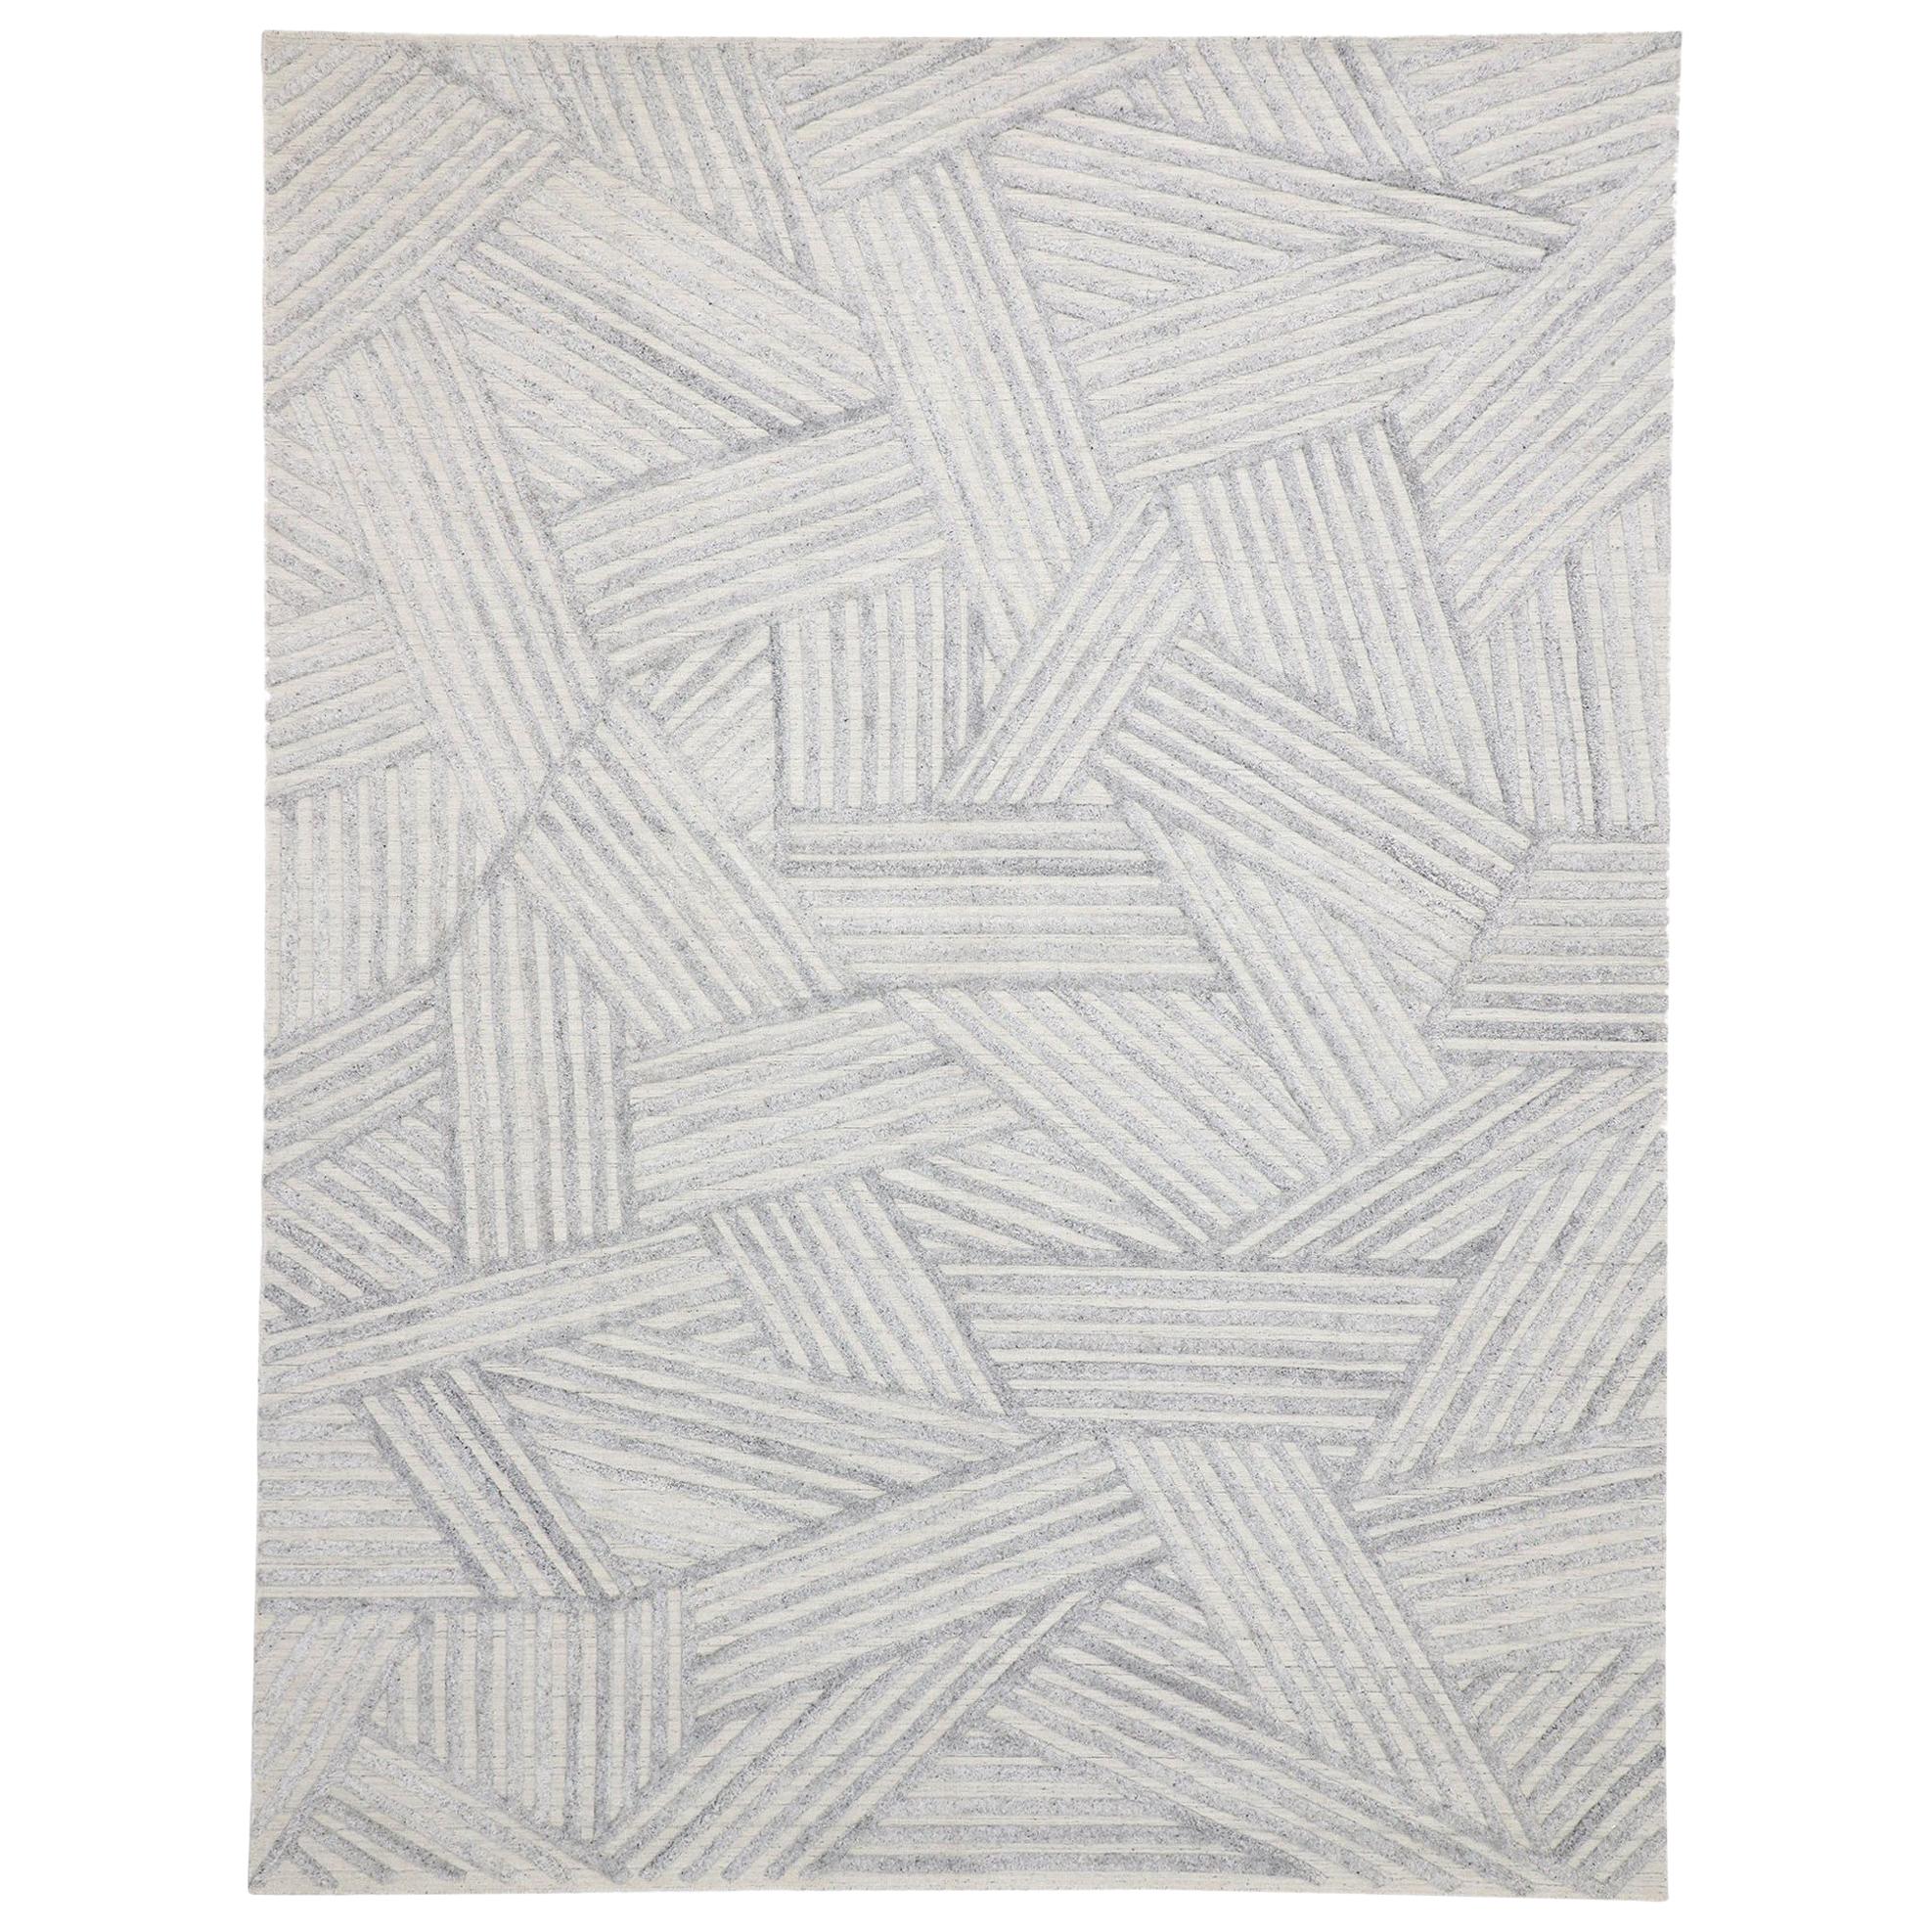 Contemporary Area Rug with Bauhaus Style, Texture Area Rug